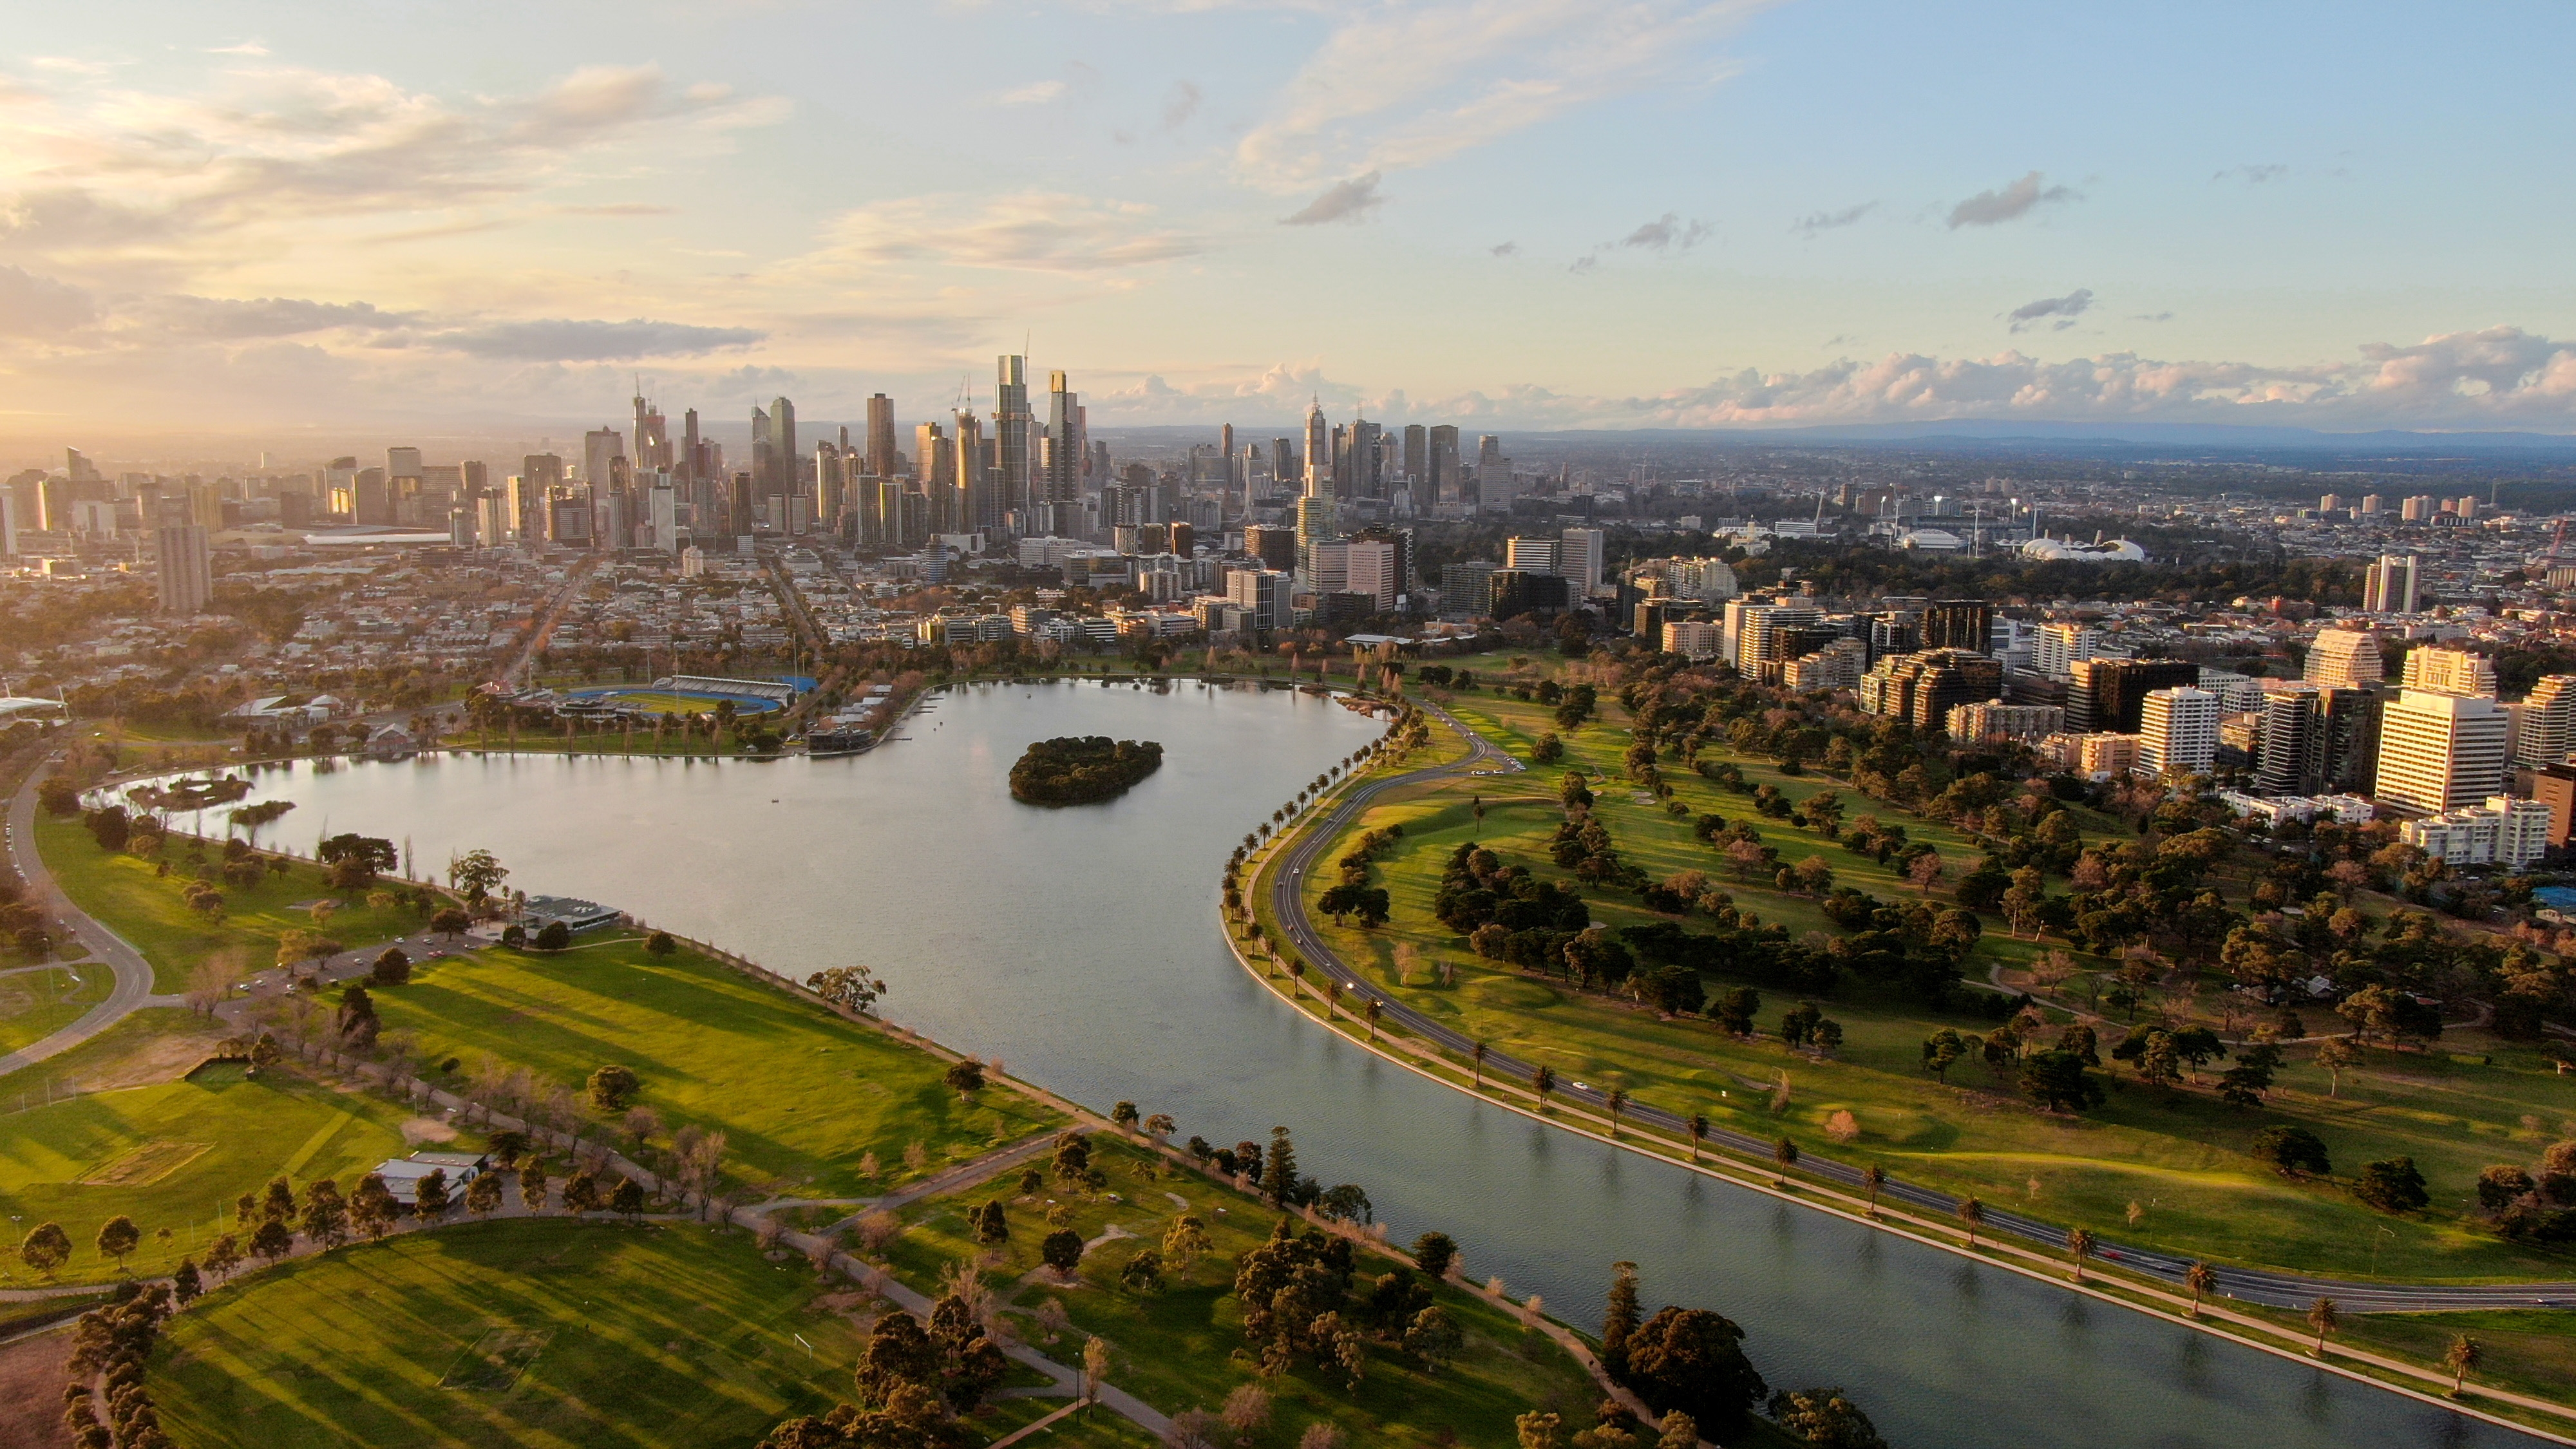 Albert Park Lake as we know it today